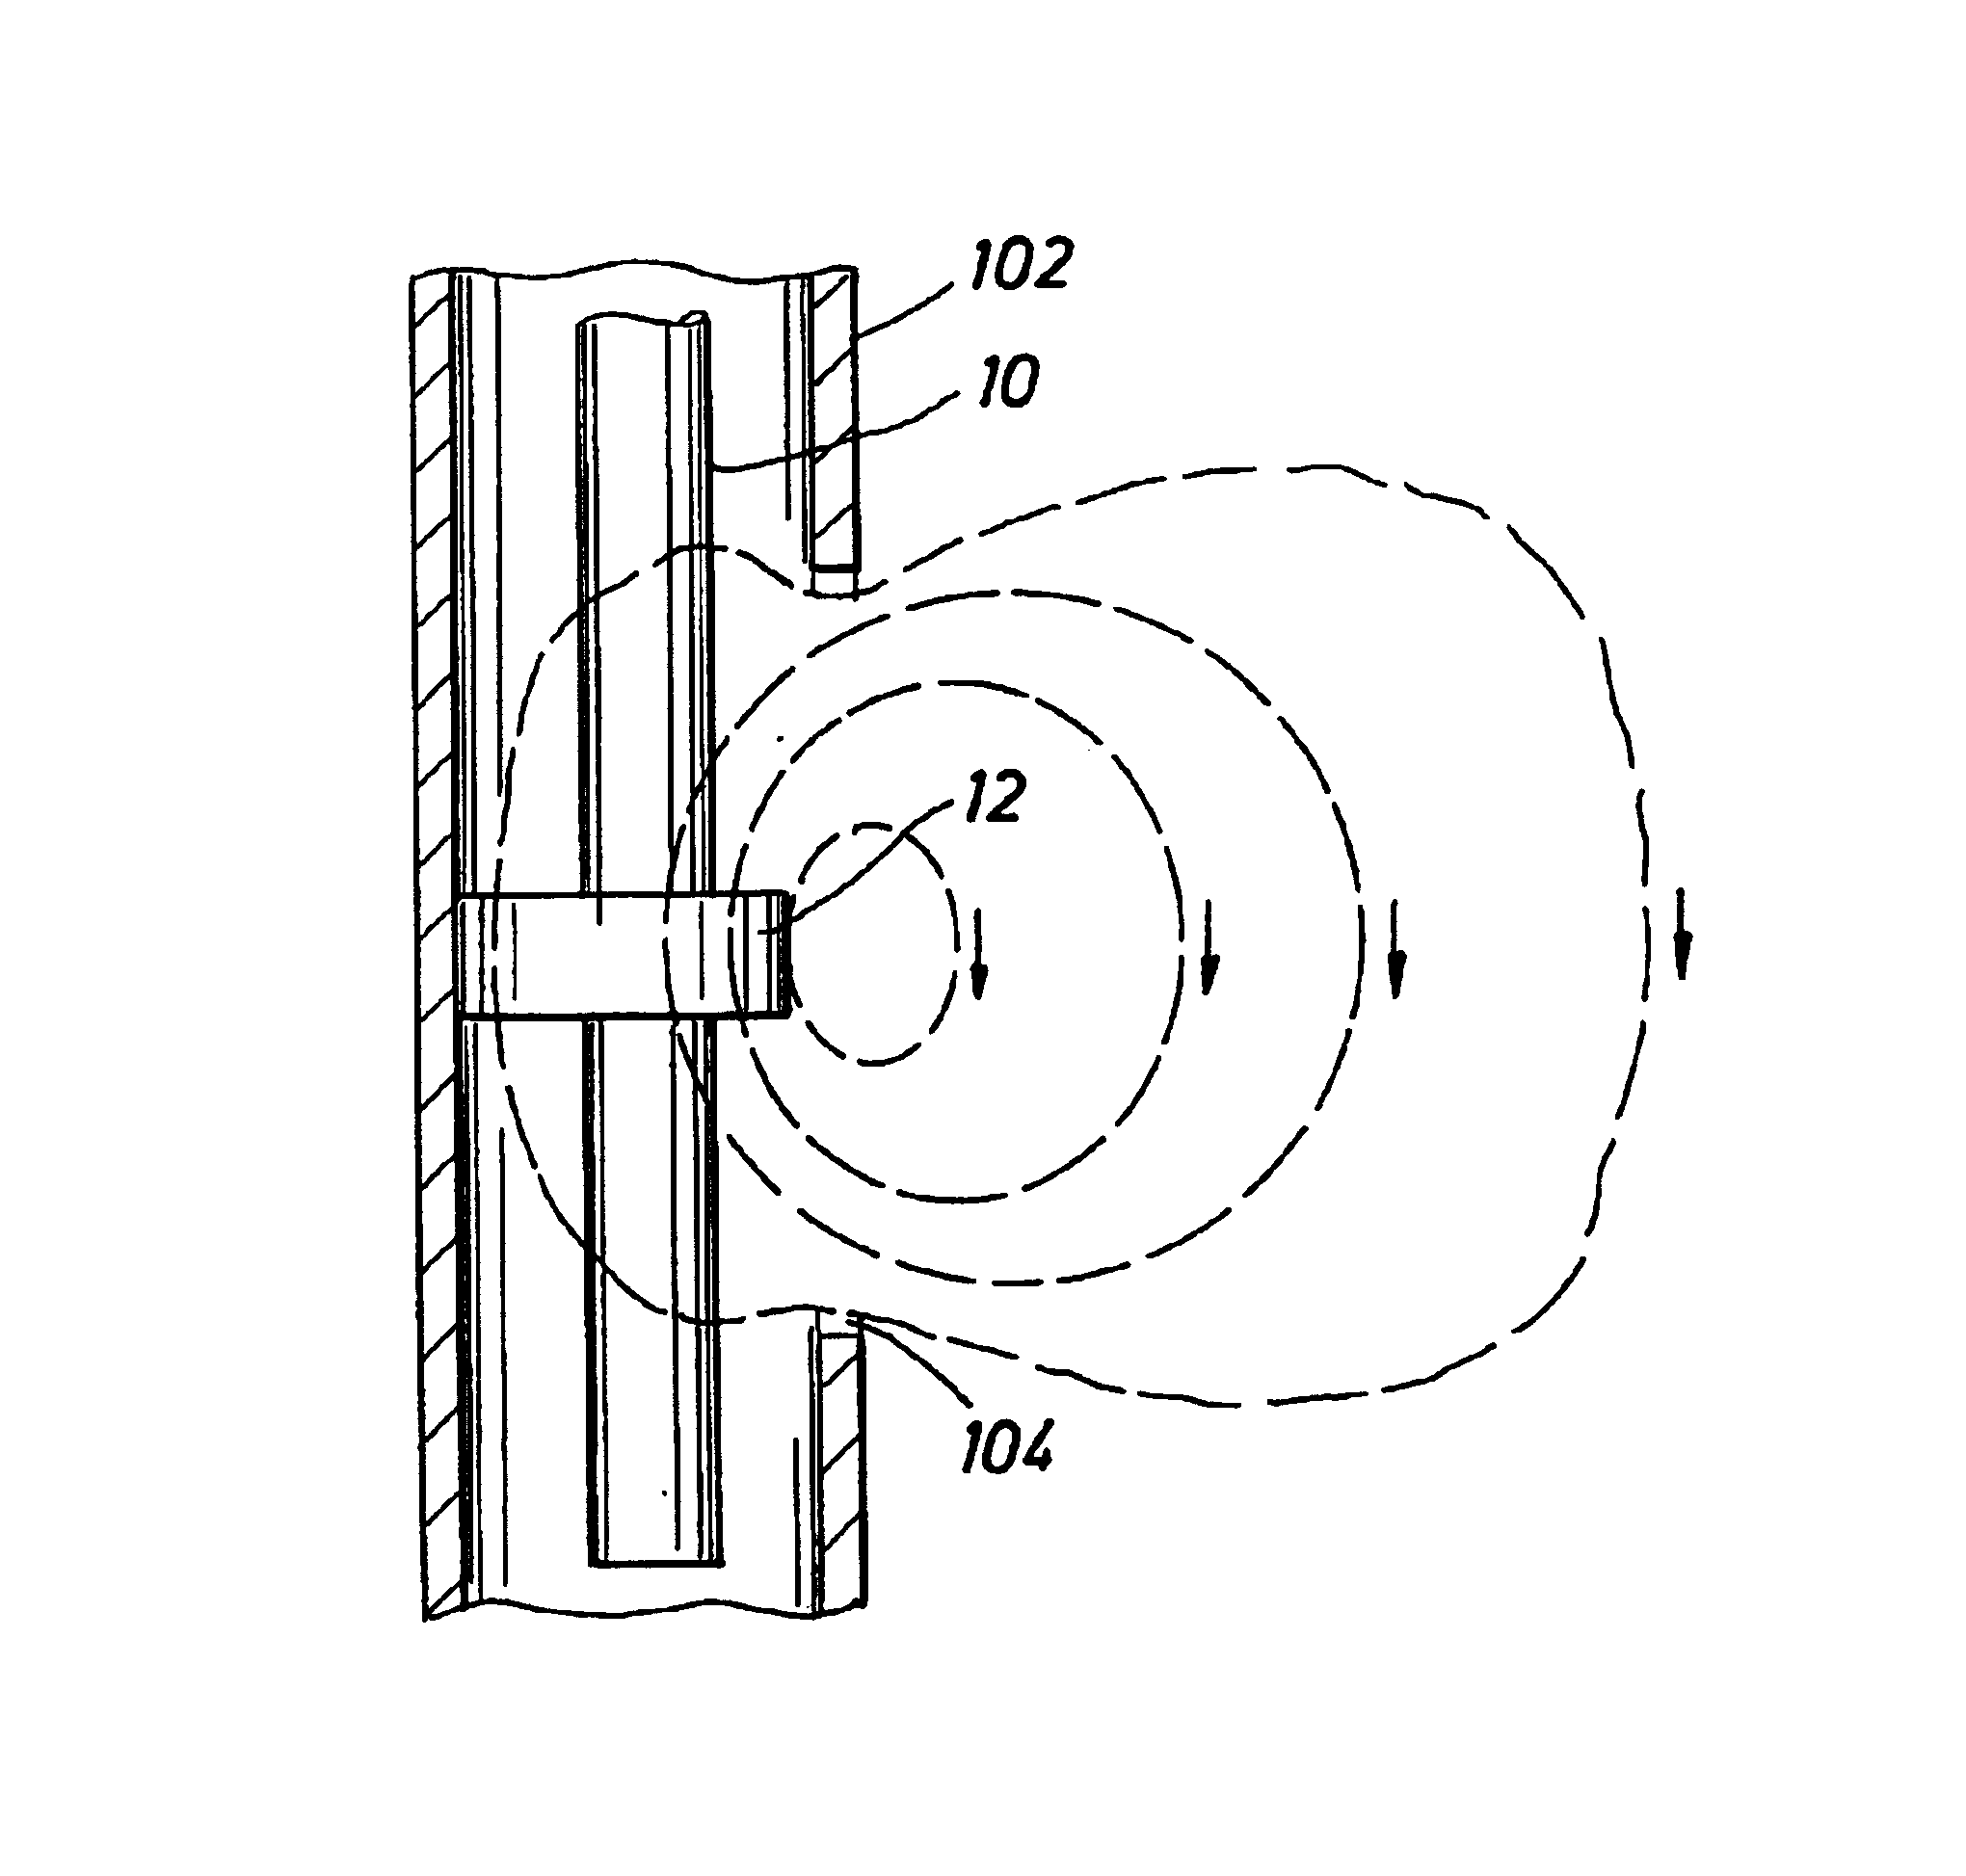 Modified tubular equipped with a tilted or transverse magnetic dipole for downhole logging